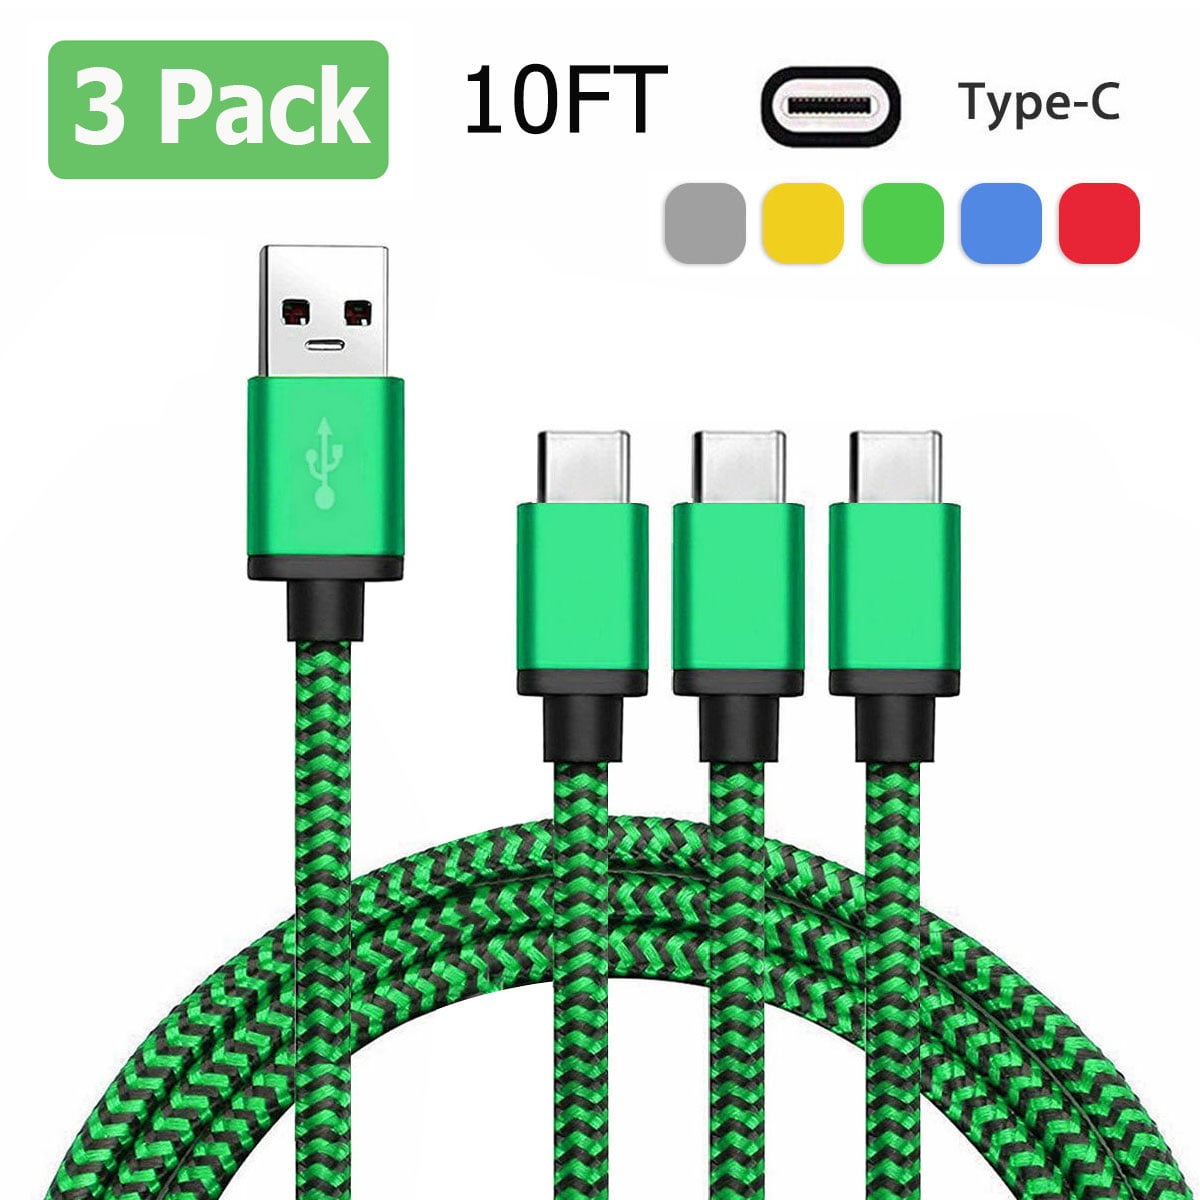 LG V30 V20 G7 G6 G5 Google Pixel Nylon Braided USB-C Charger Cord USB 2.0 Compatible with Samsung Galaxy S10/S10+/S10e S9/S9+ Note10 9 8 S8 S8 Plus USB Type C Cable 10ft TR-Tech USB C Cable 5 Pack 